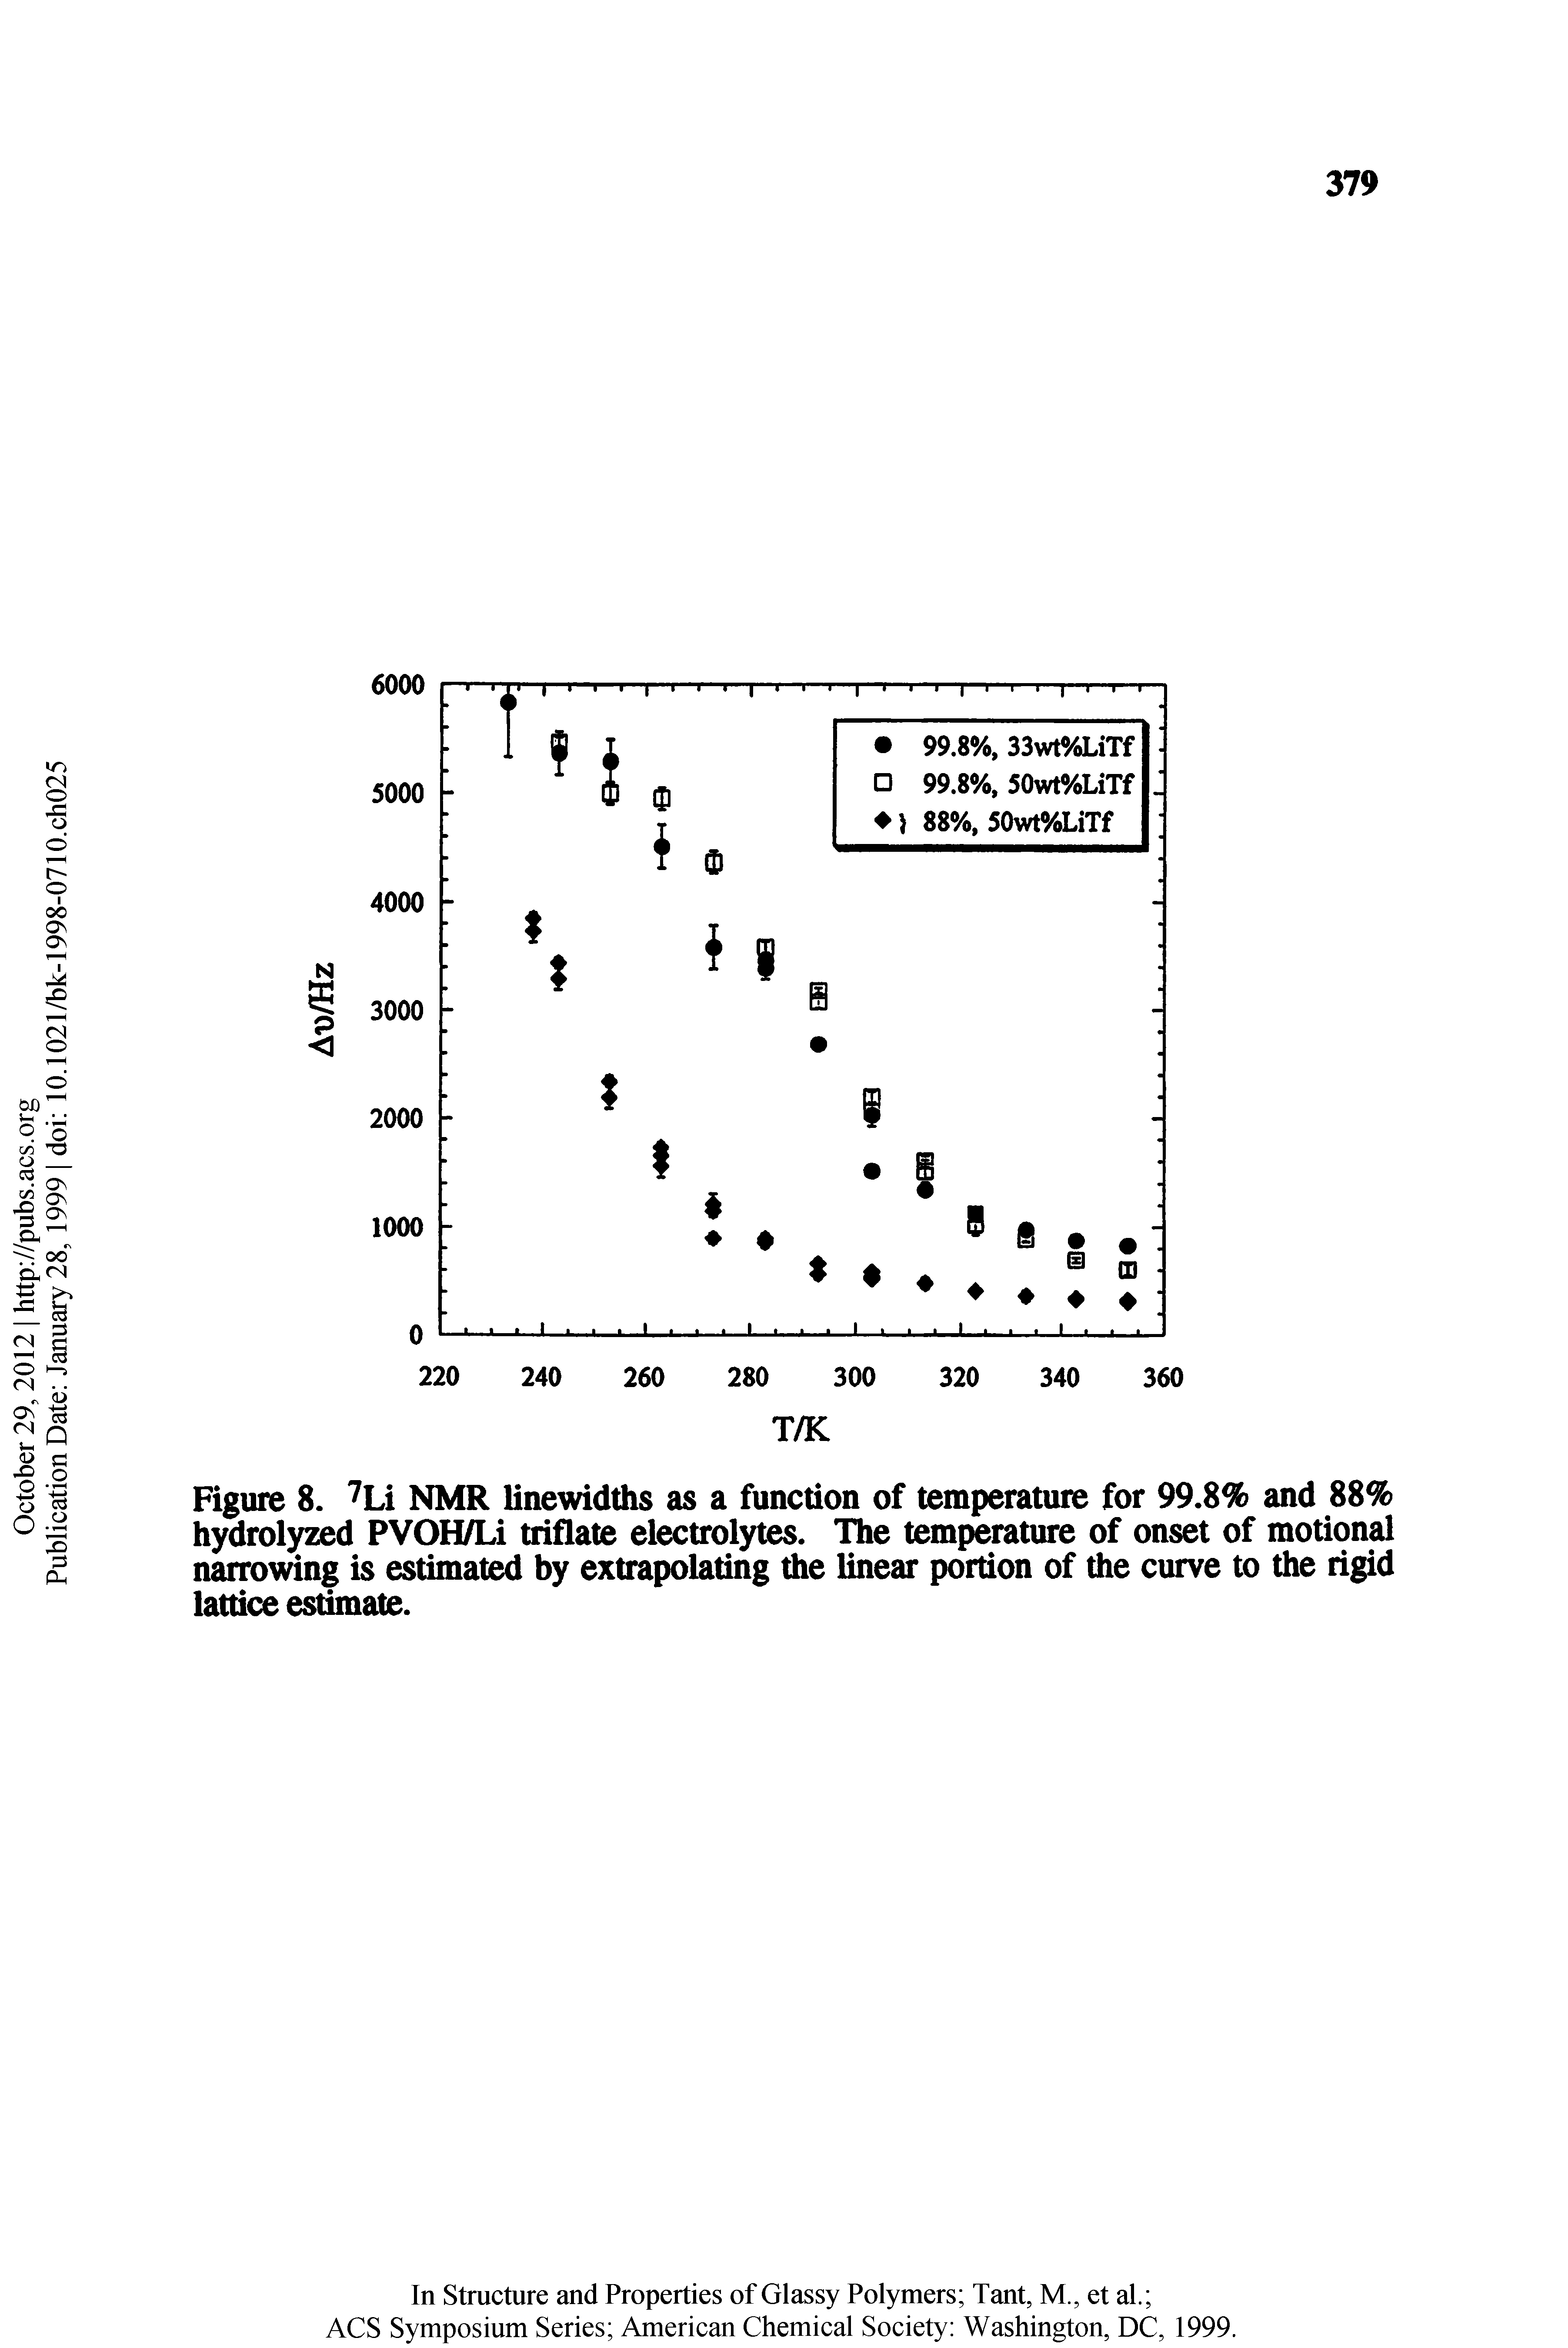 Figure 8. NMR linewidths as a function of temperature for 99.8% and 88% hydrolyzed PVOH/Li triflate electrolytes. The temperature of onset of motional narrowing is estimated by extrapolating the linear portion of the curve to the rigid lattice estimate.